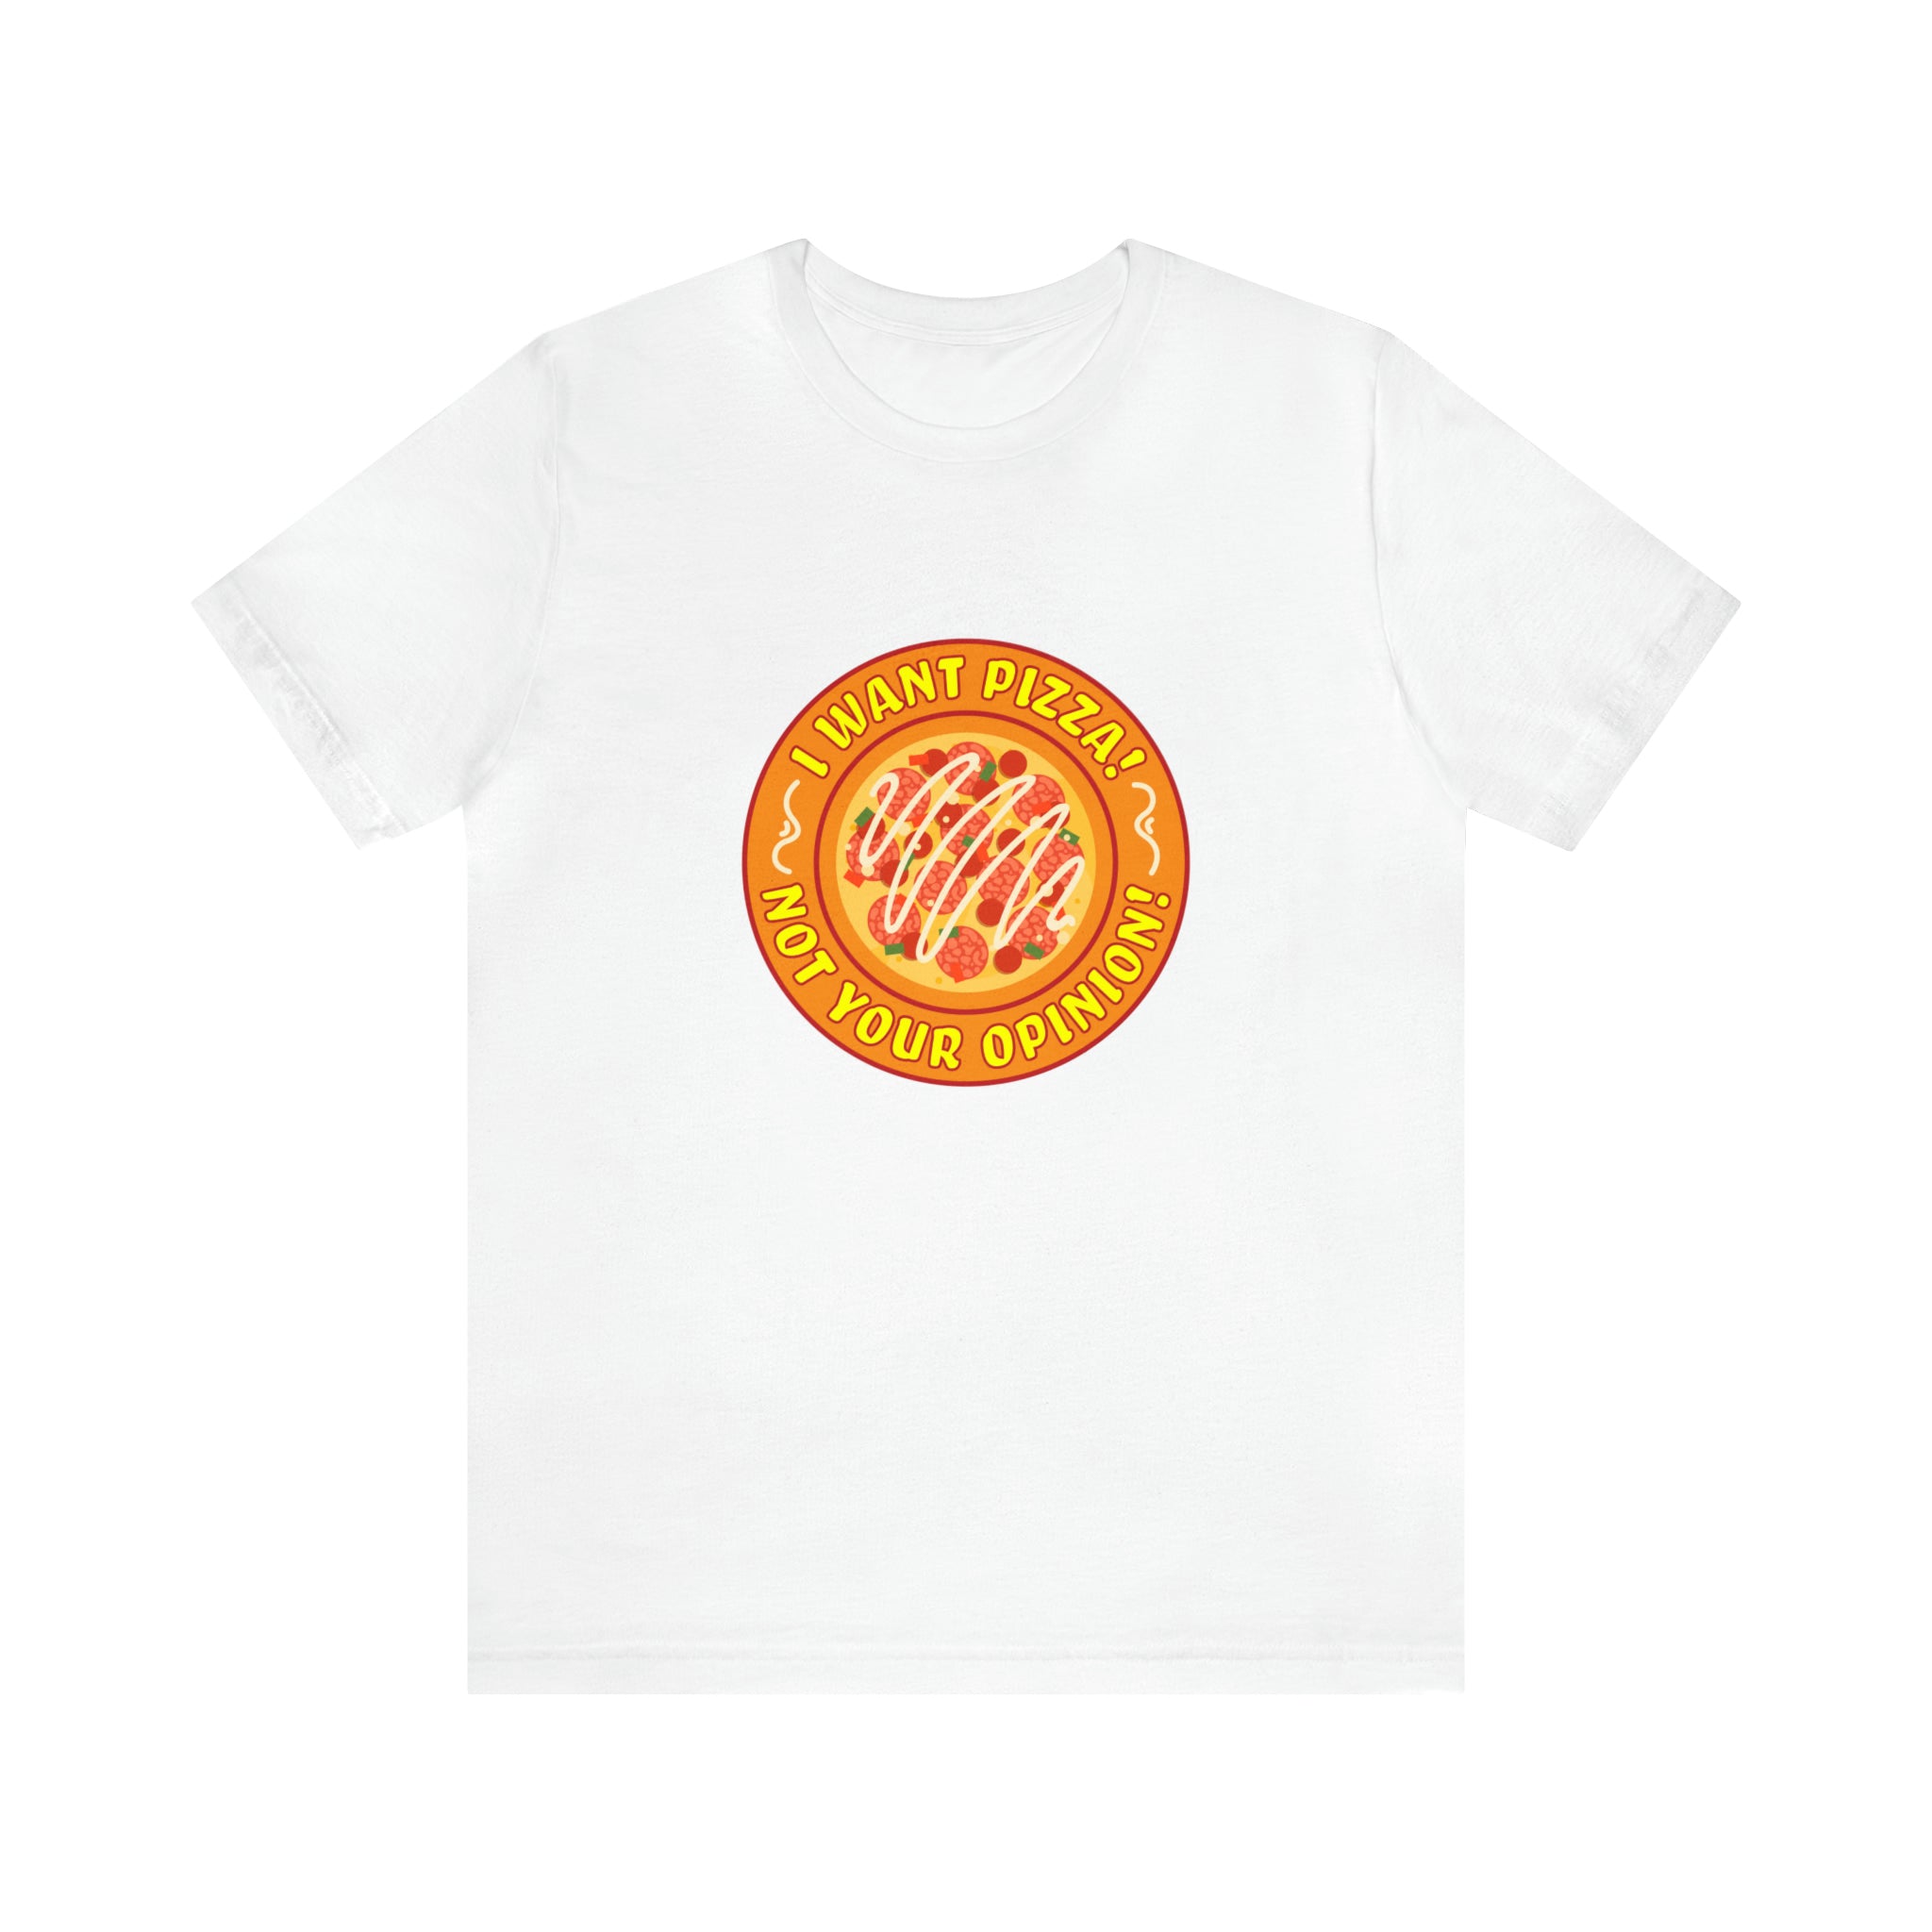 I want pizza not your opinion T-Shirt